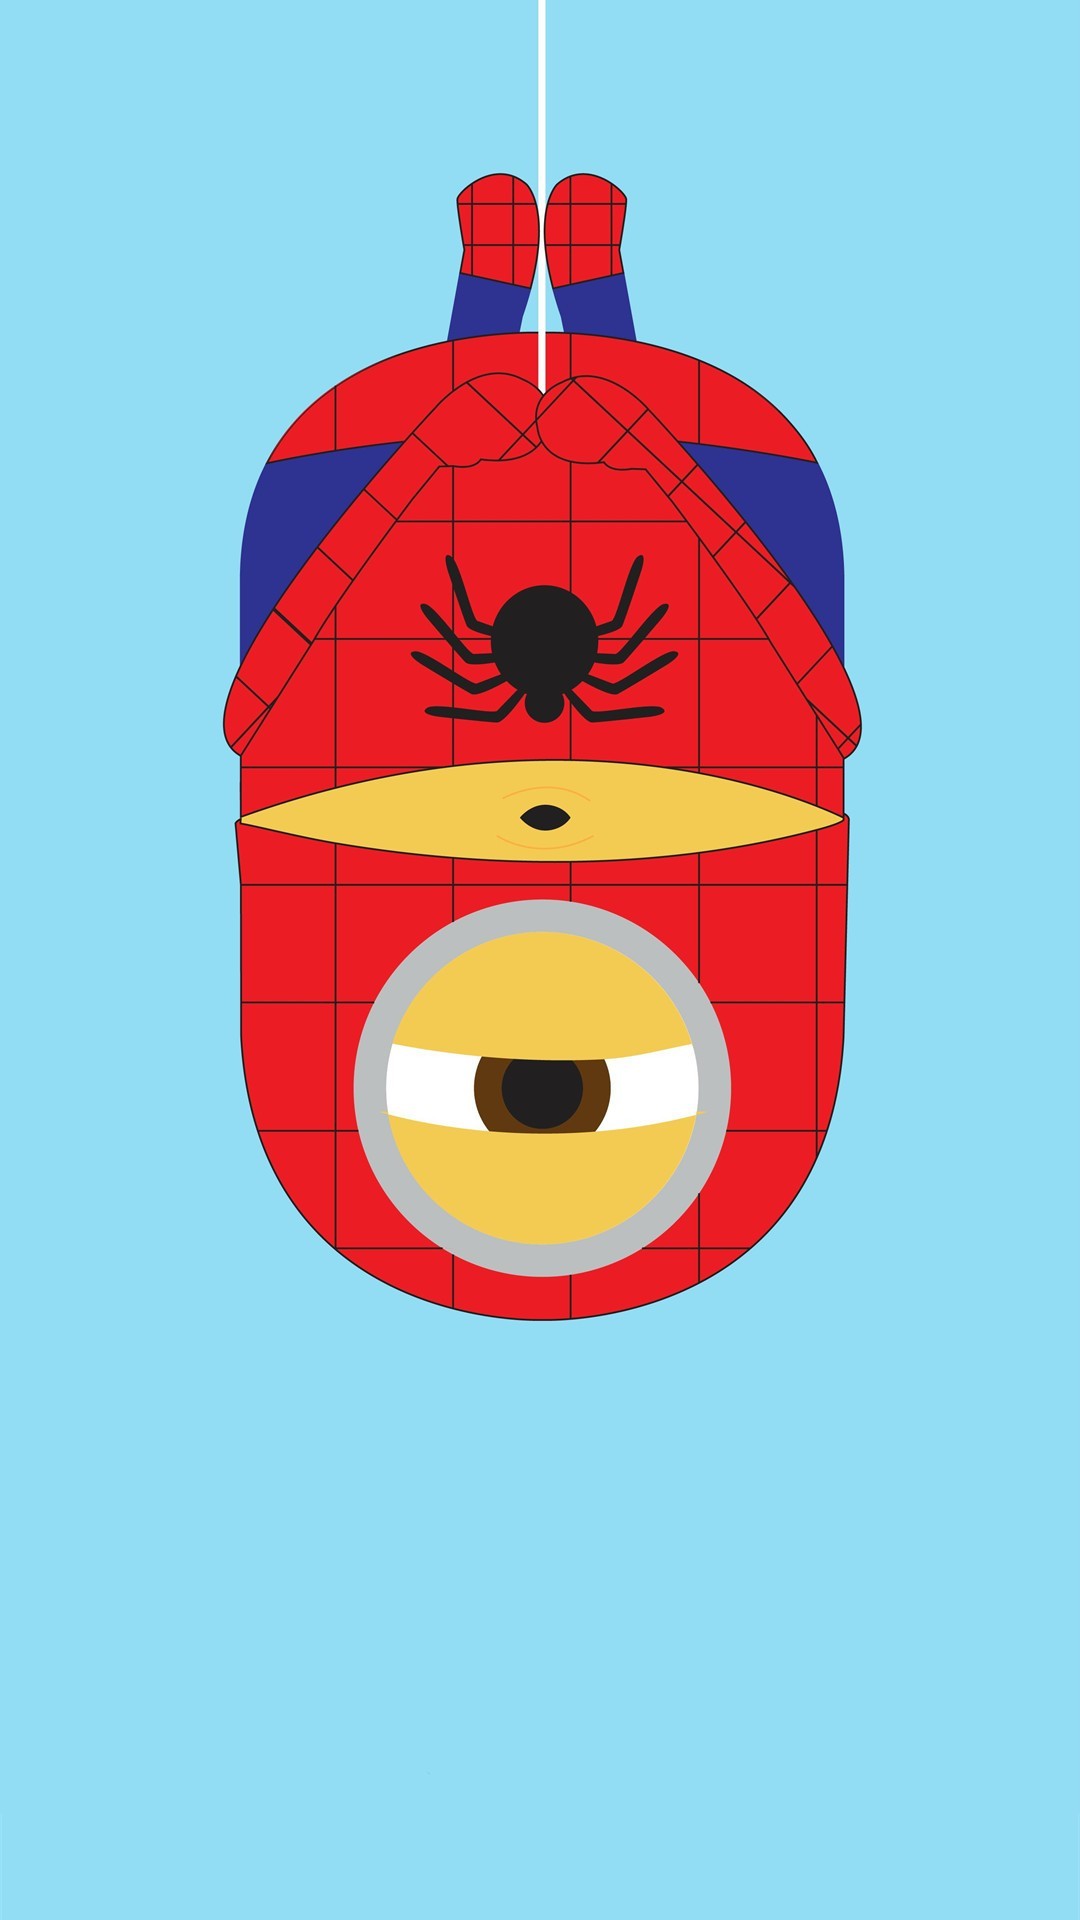 1080x1920 Wallpaper Weekends: Minions Marvel Superheroes for Your iPhone ...